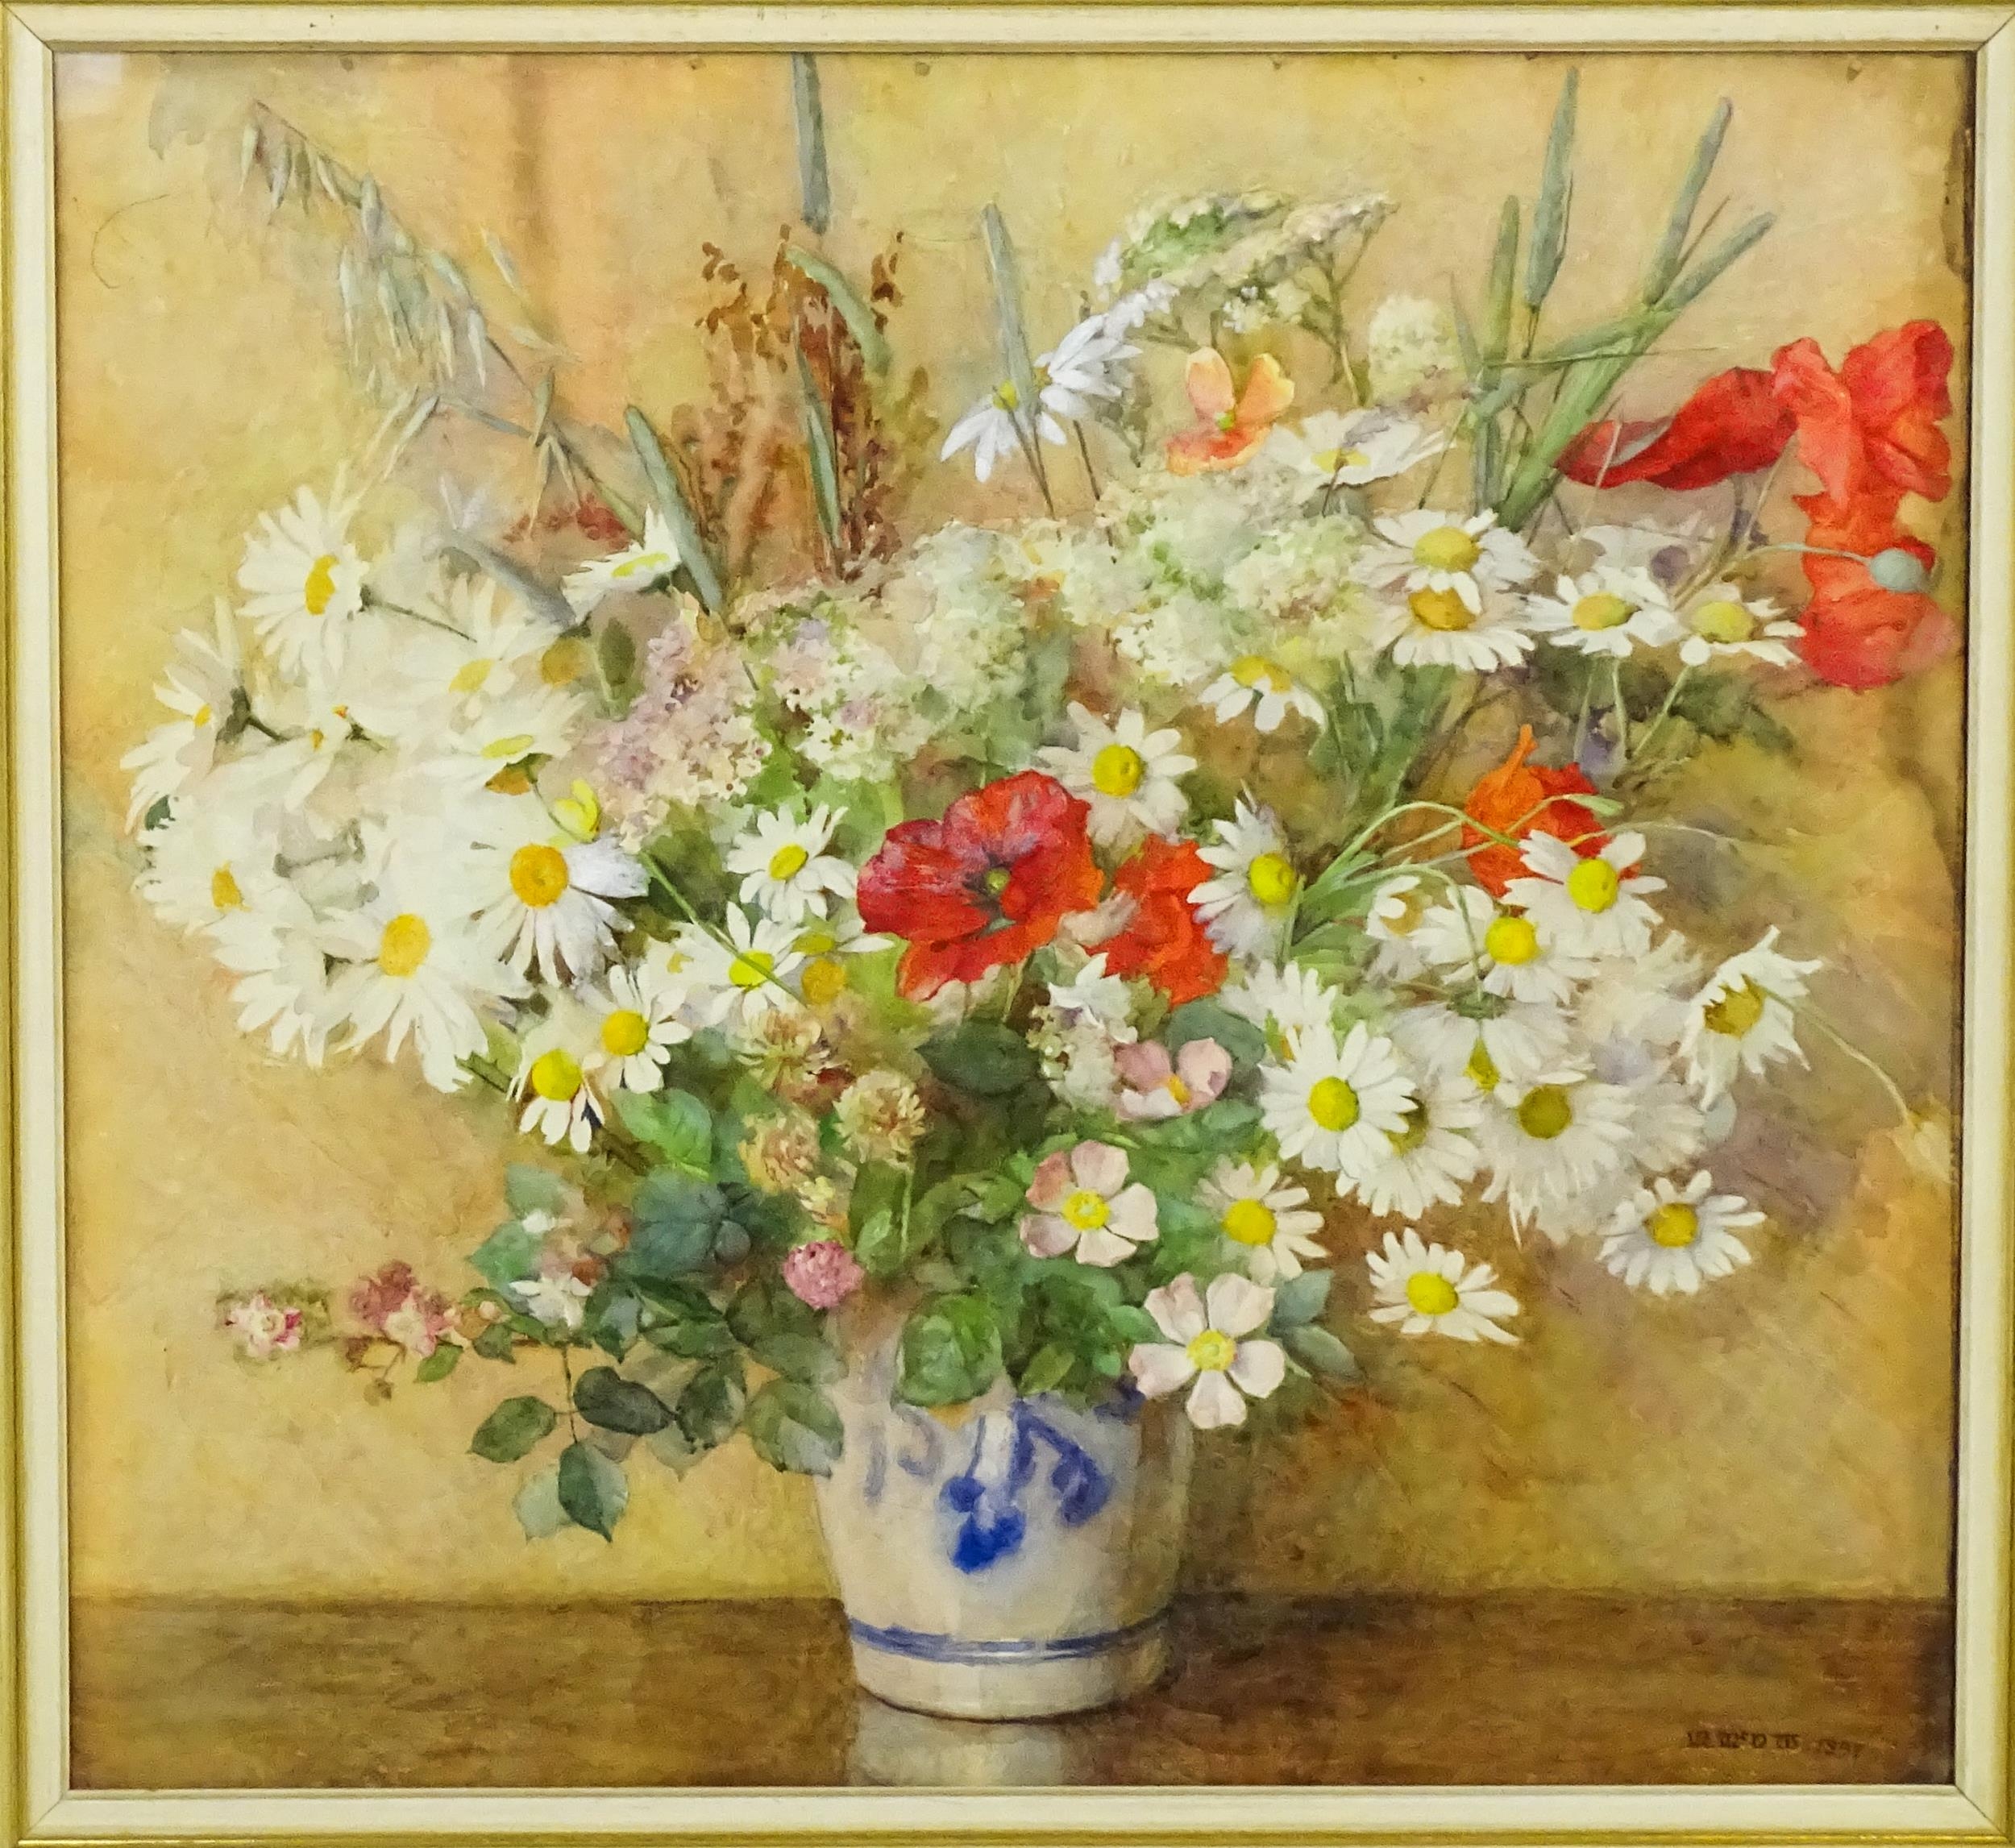 19th century, Watercolour, A still life study with flowers and foliage in a blue and white vase to - Image 2 of 4